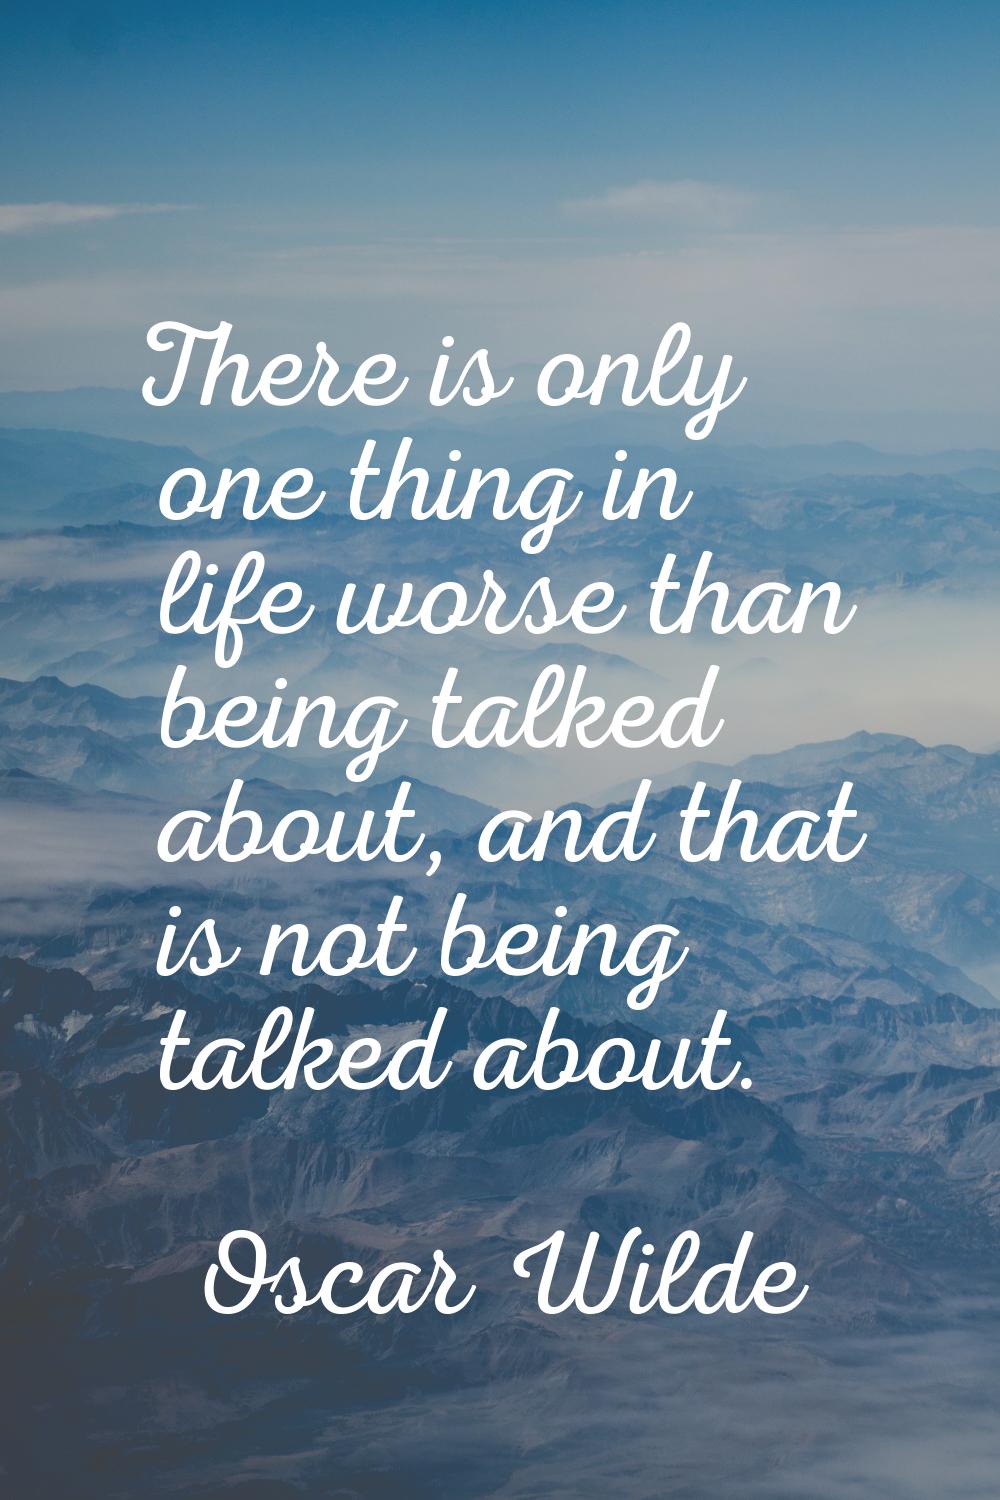 There is only one thing in life worse than being talked about, and that is not being talked about.